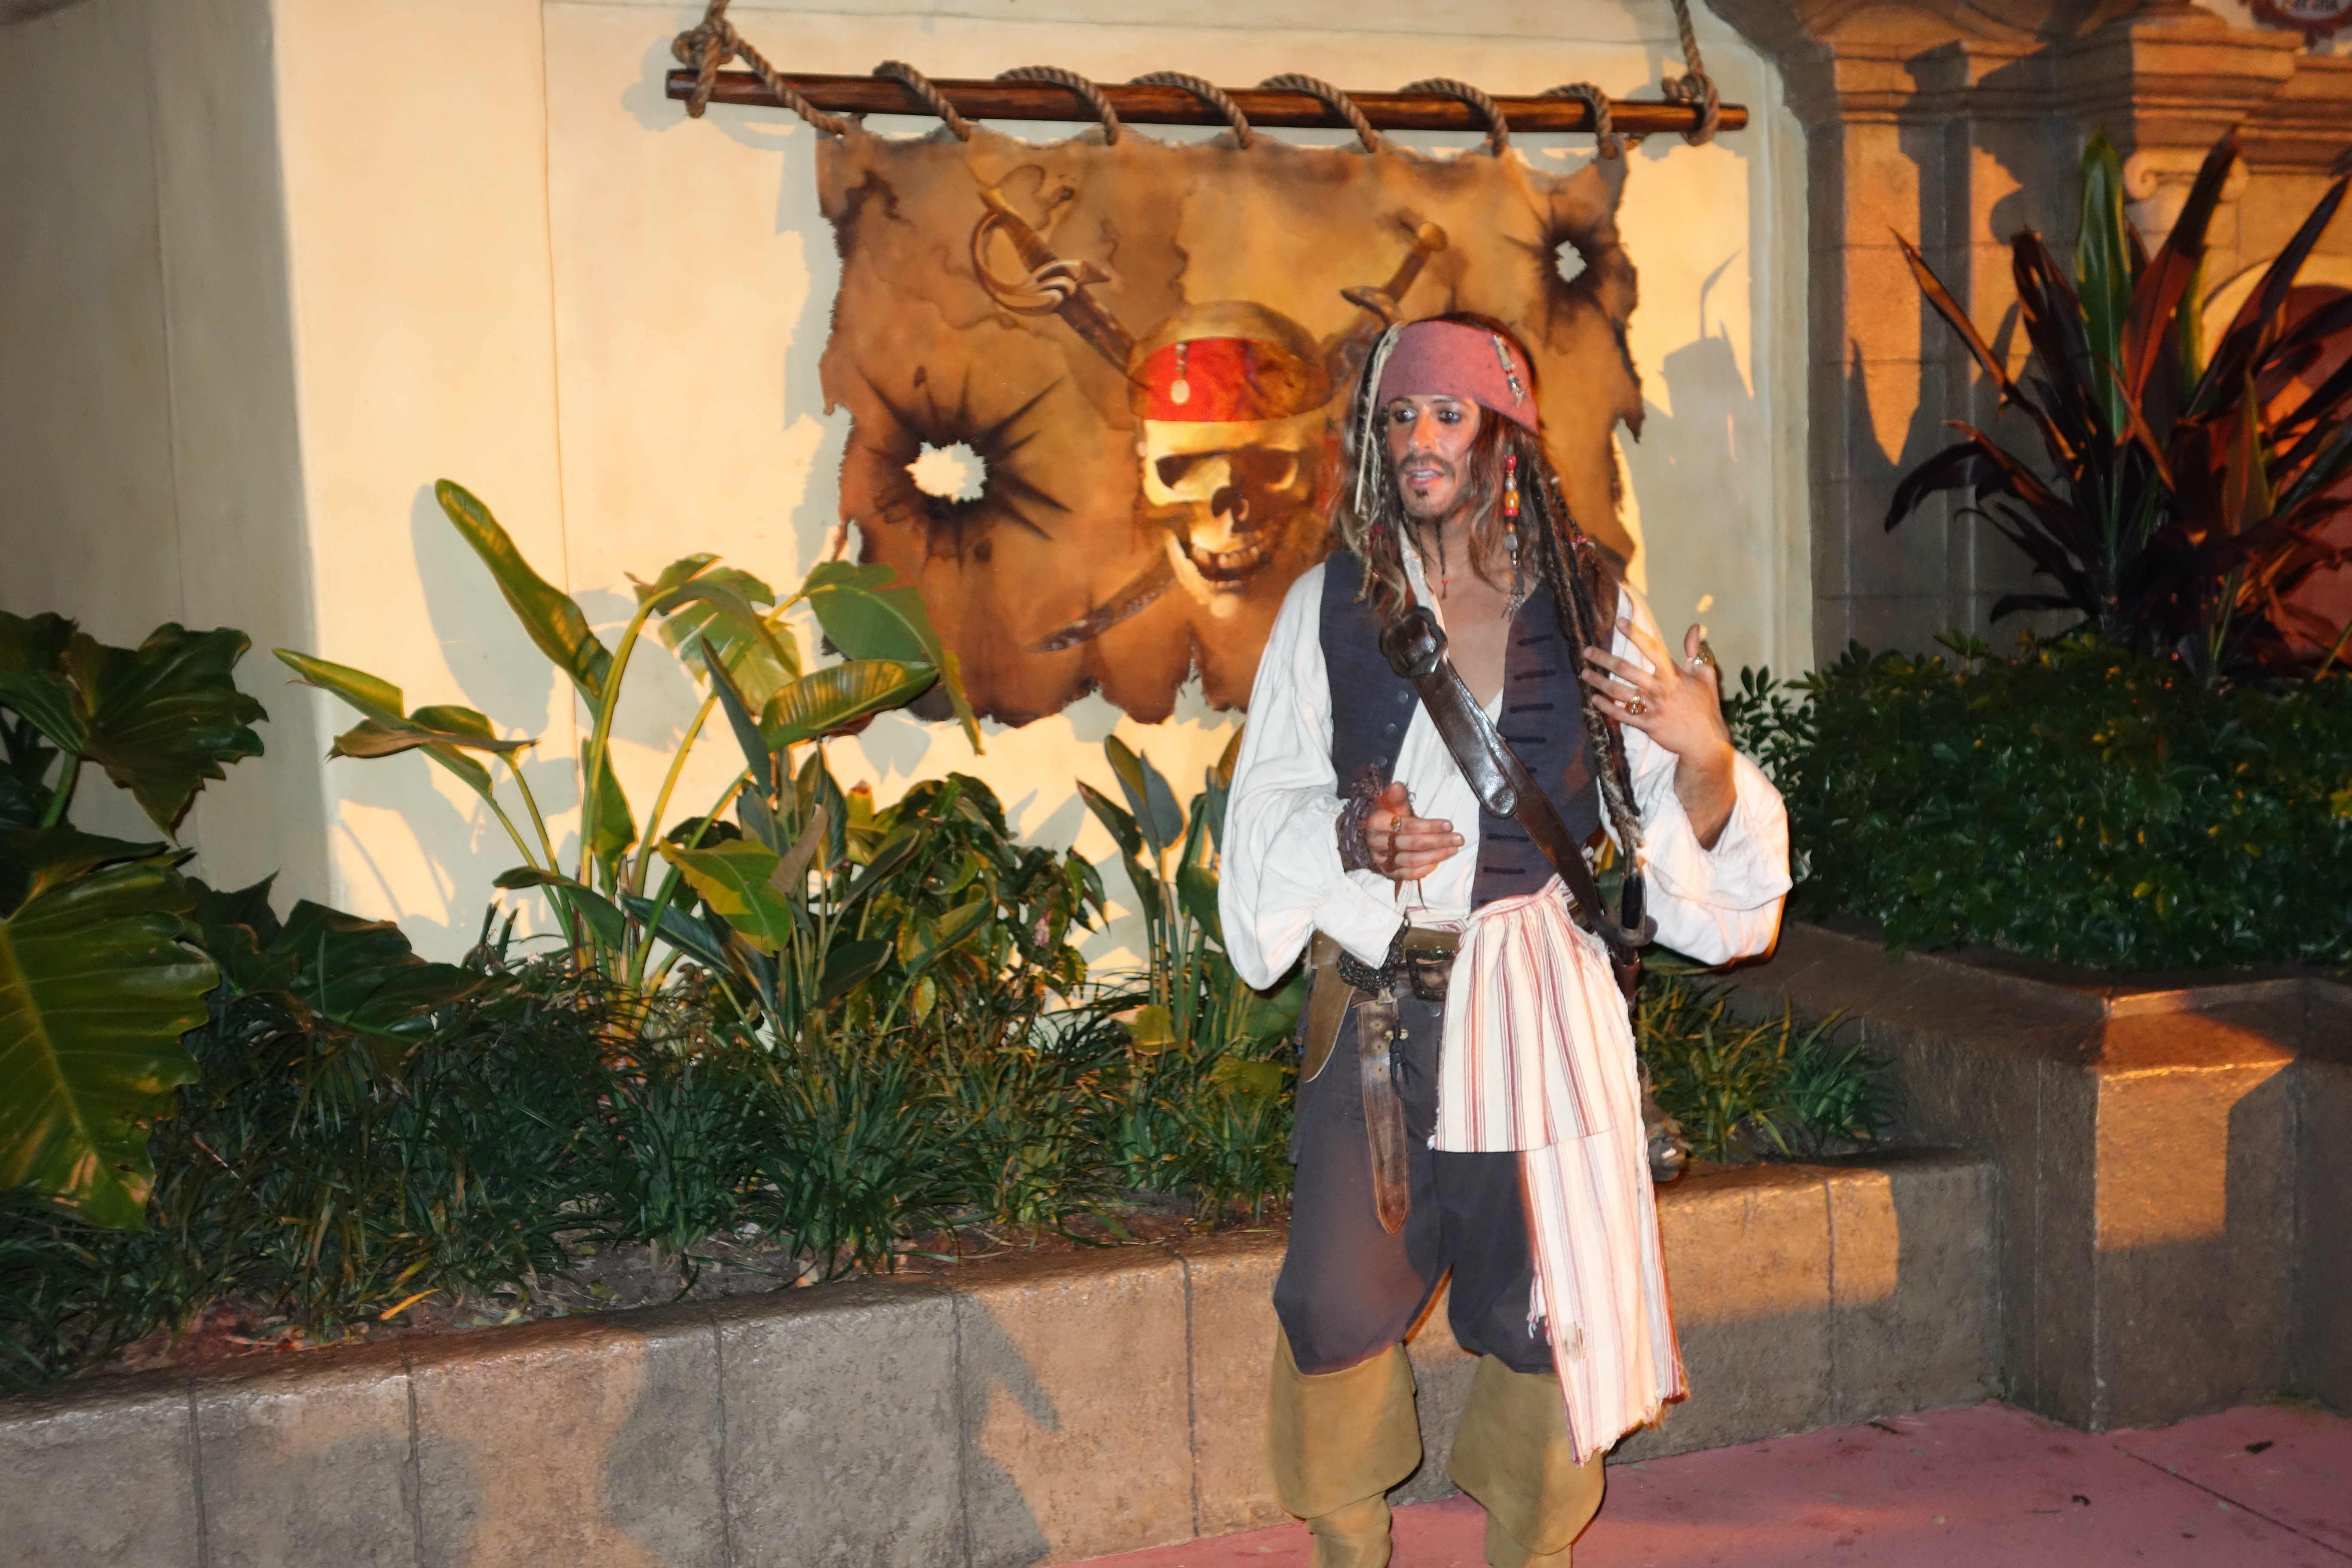 Jack Sparrow at Mickey's Not So Scary Halloween Party 2012